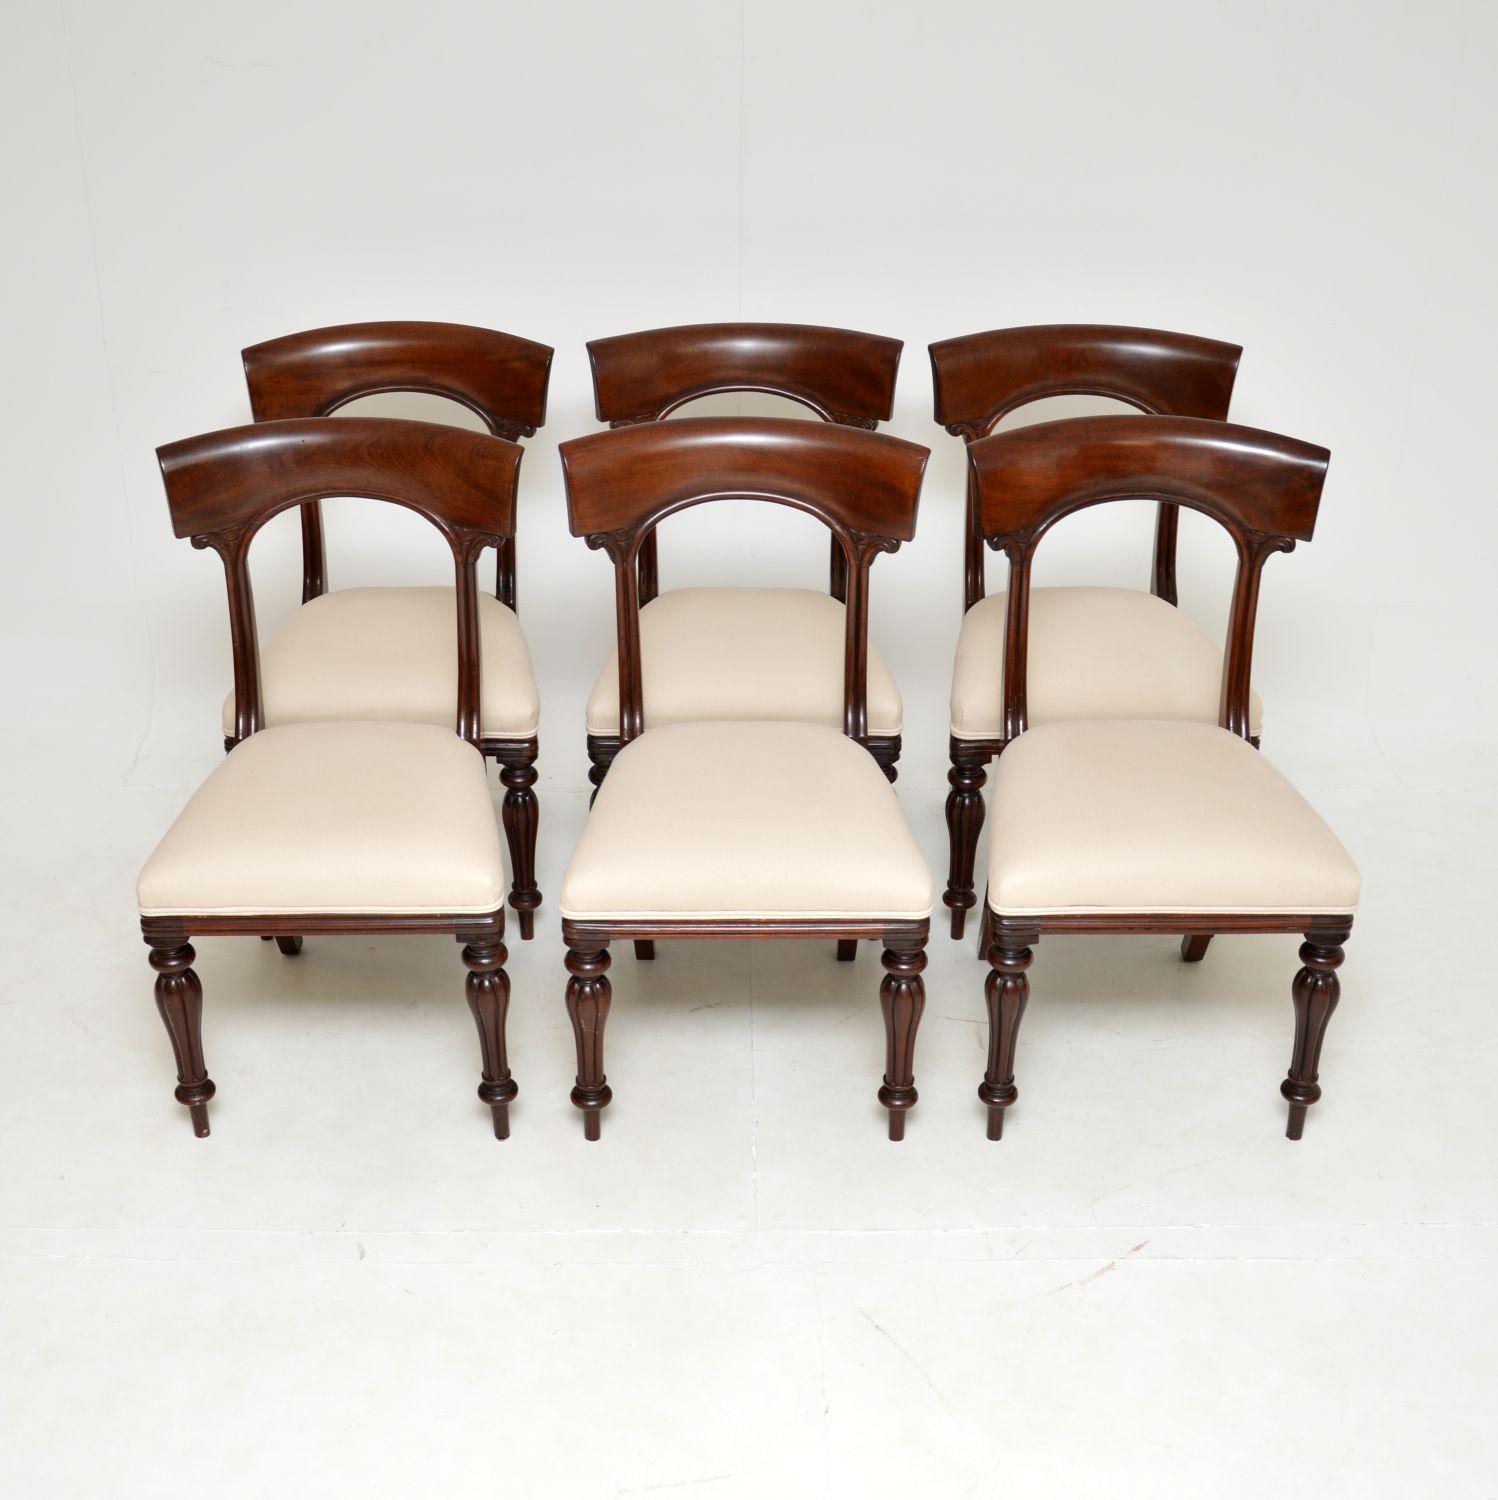 A superb set of original antique William IV period dining chairs. They were made in England, and date from around the 1830-1840’s.

The quality is fantastic, they have a beautiful design and are sturdy, comfortable and supportive. The arched backs